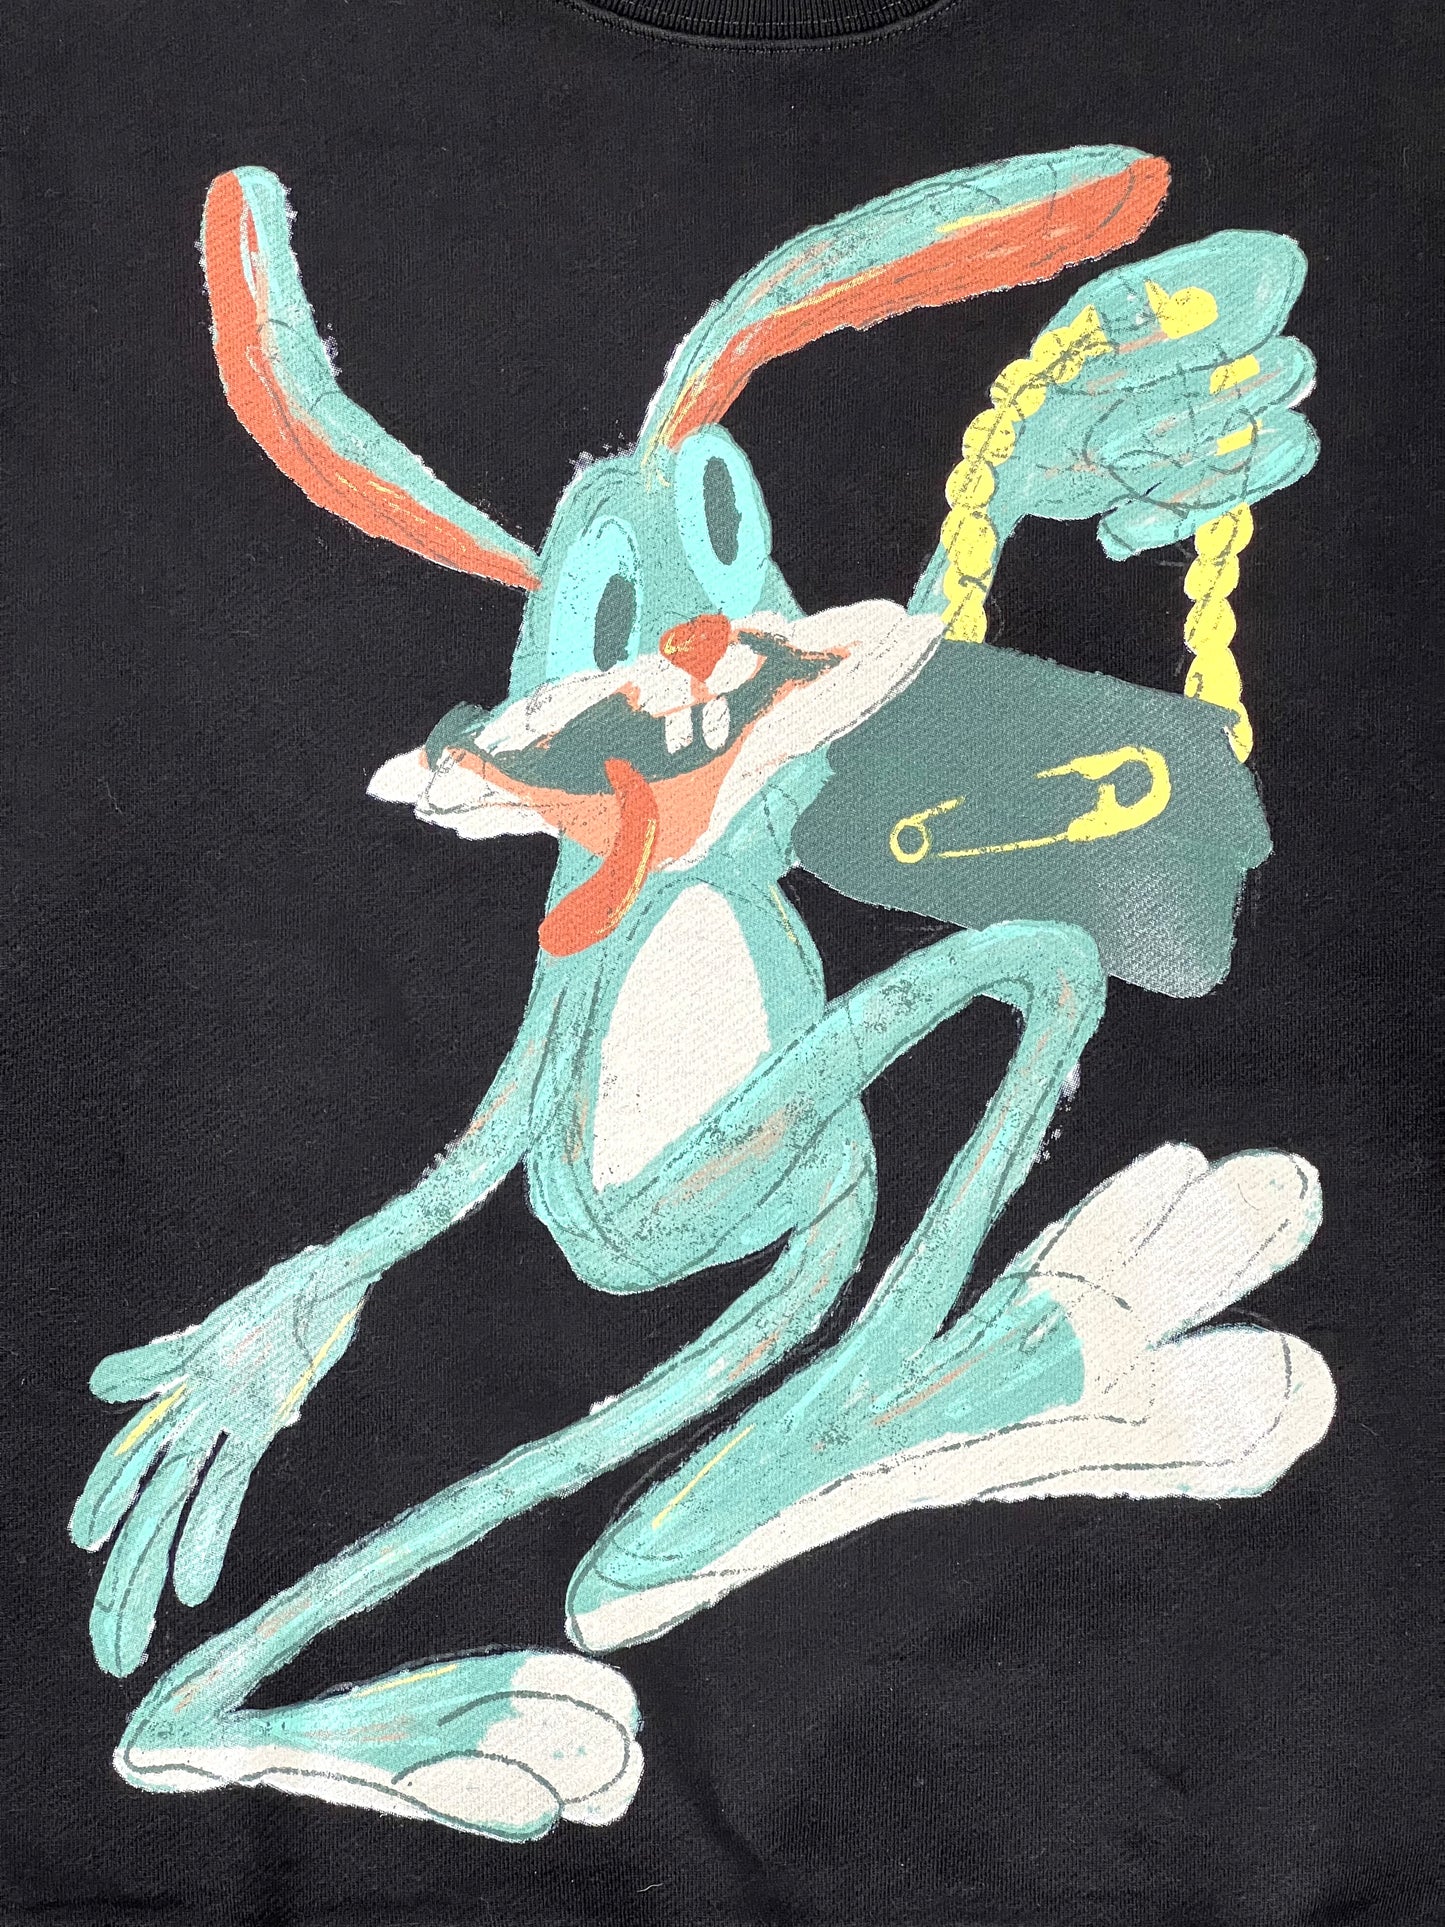 A DOMREBEL SHOPPER SWEATSHIRT BLACK with an image of a rabbit holding a purse.